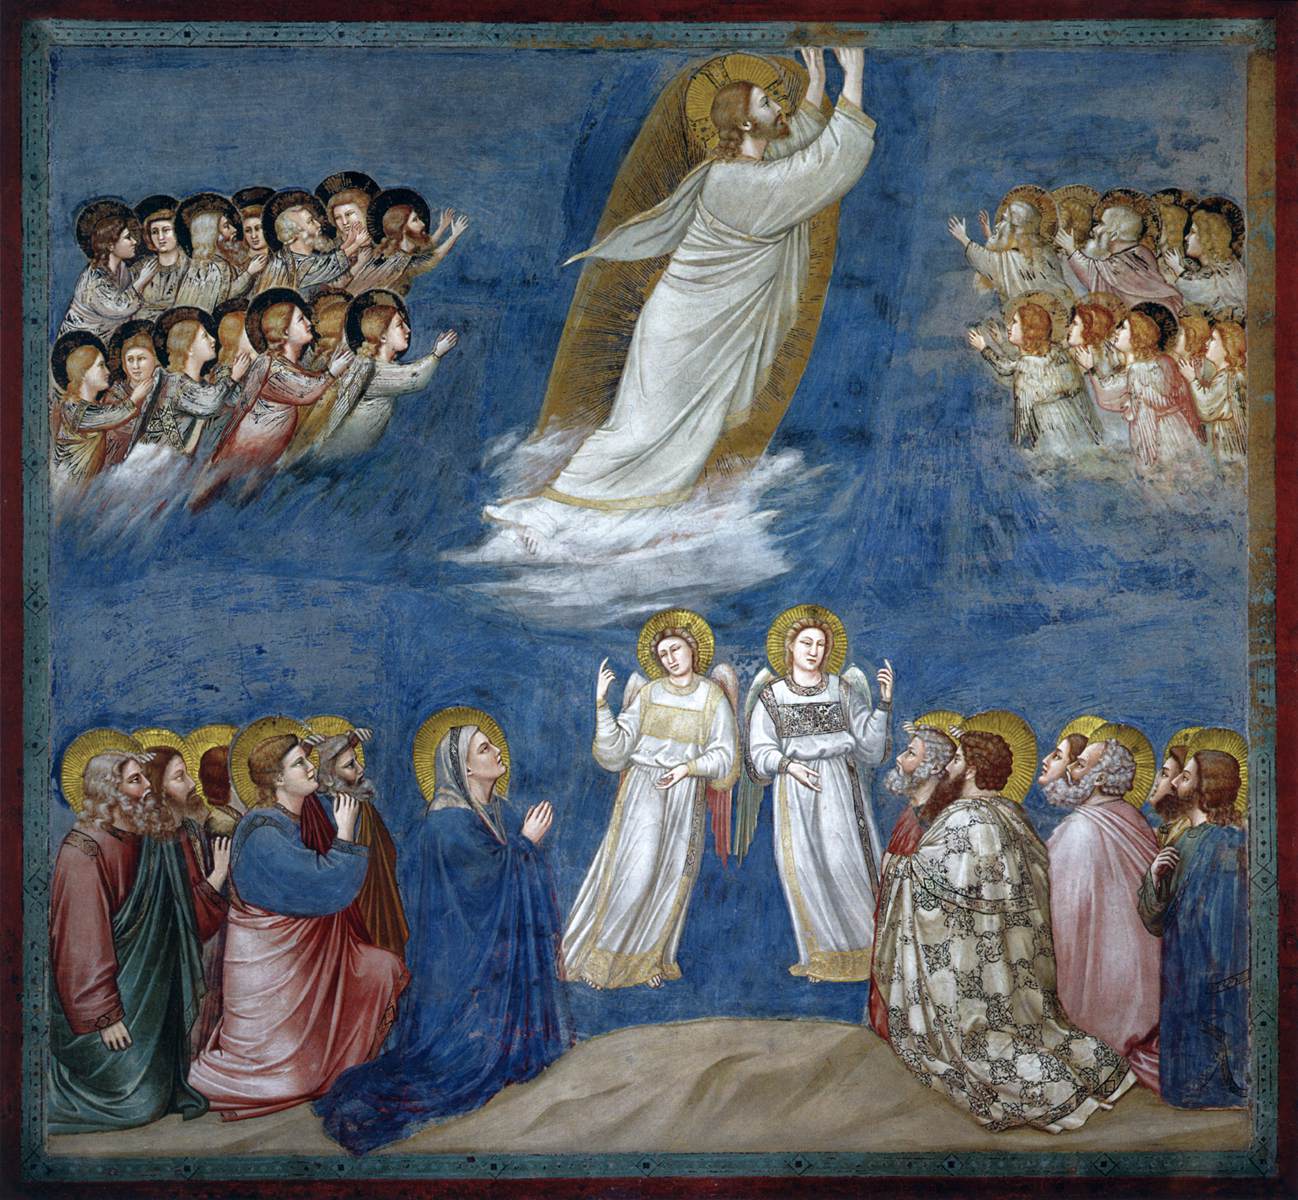 No 38 Scenes from the Life of Christ: 22 Ascension